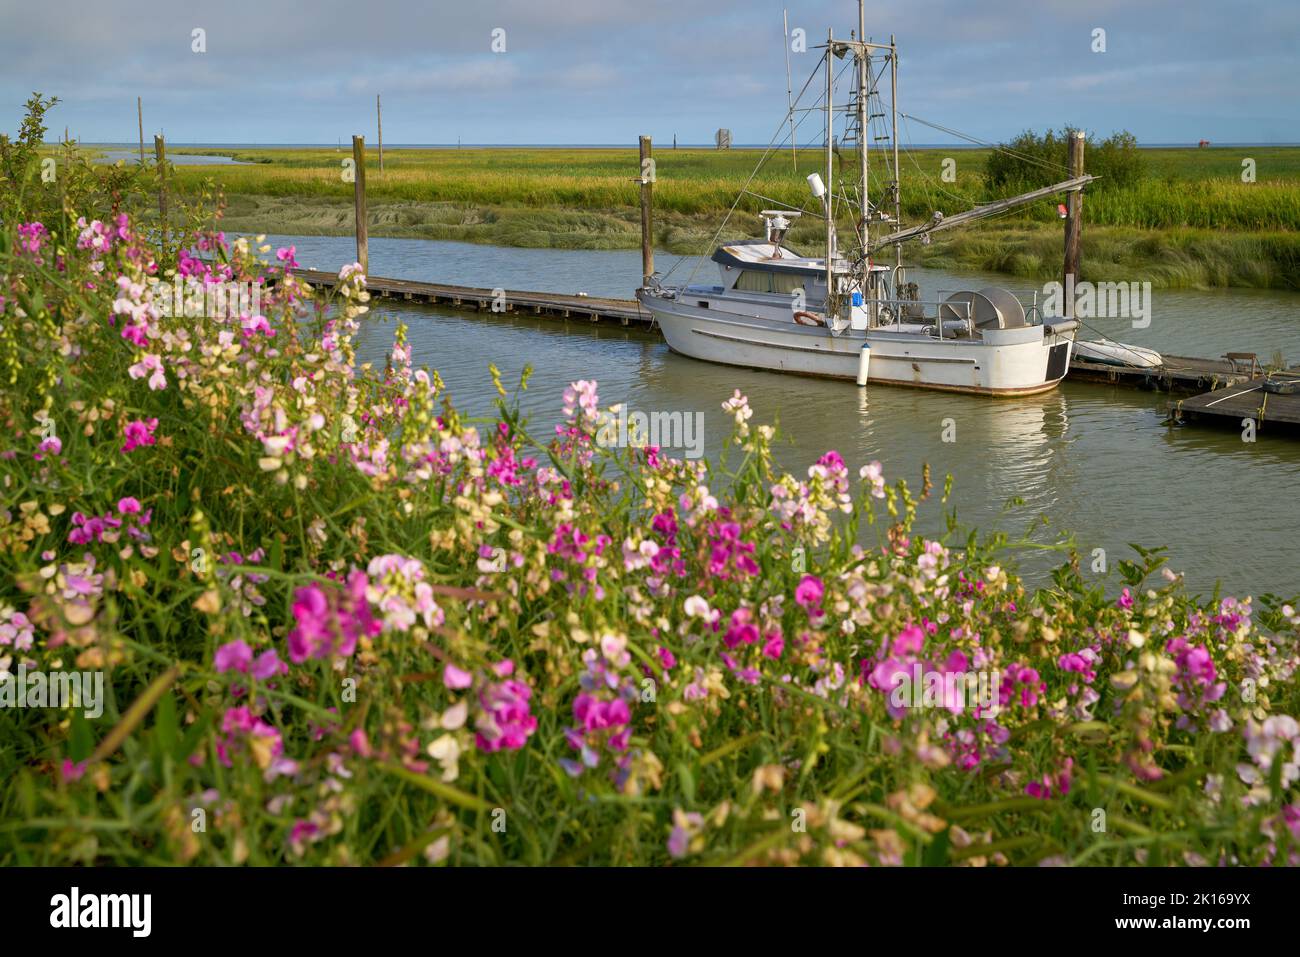 Scotch Pond Spring Flowers Steveston. Garry Point spring flowers frame a gillnetter tied to the dock. Steveston, British Columbia, Canada. Stock Photo